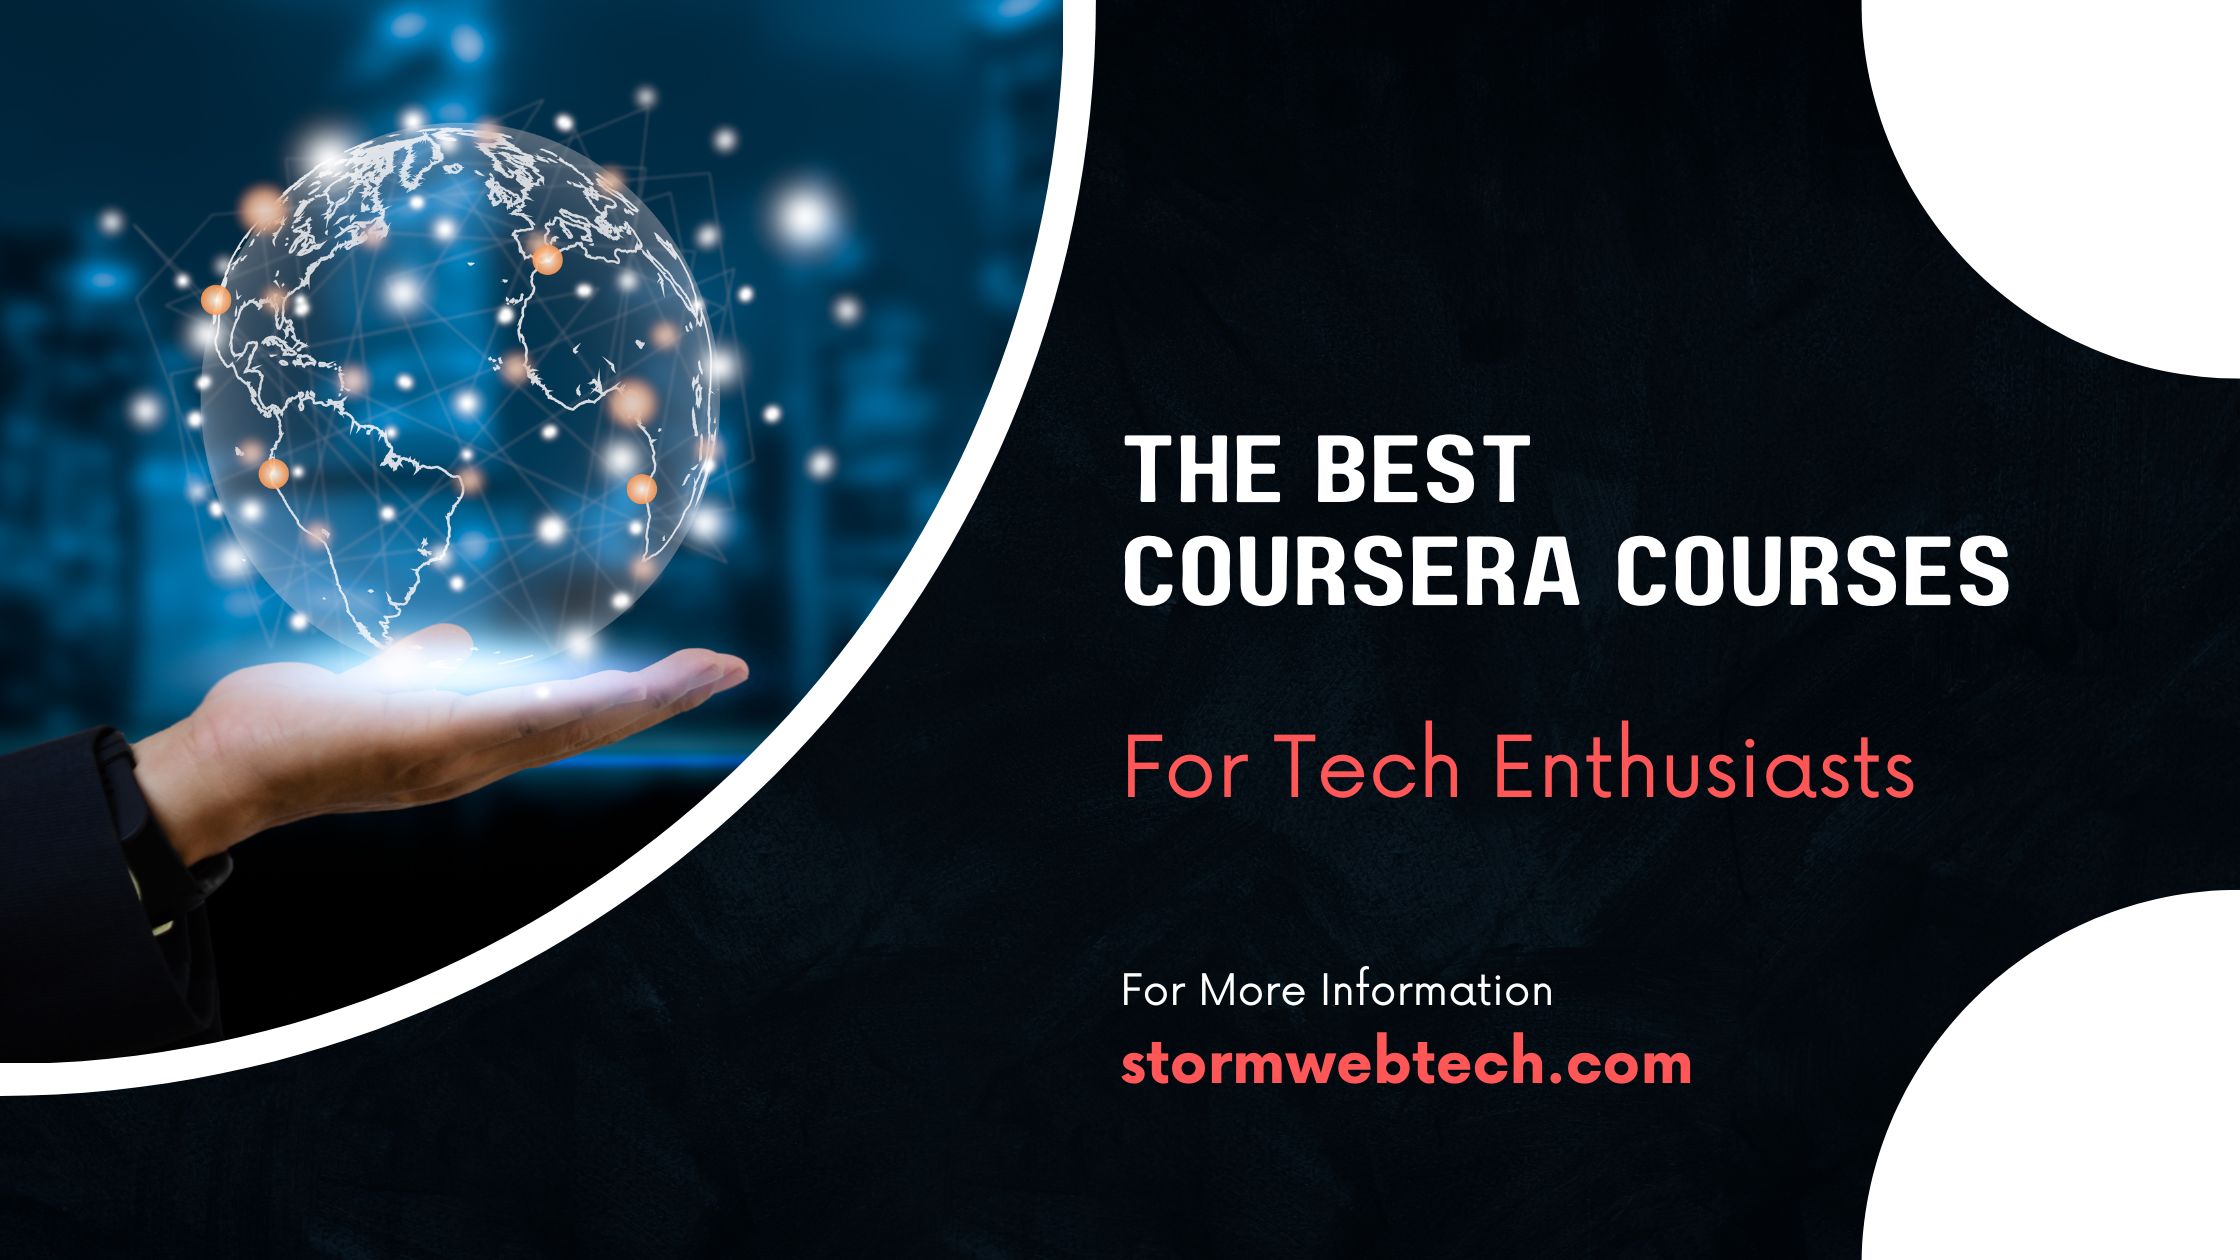 specifically designed Coursera courses for tech enthusiasts. From artificial intelligence and data science to web development and cybersecurity